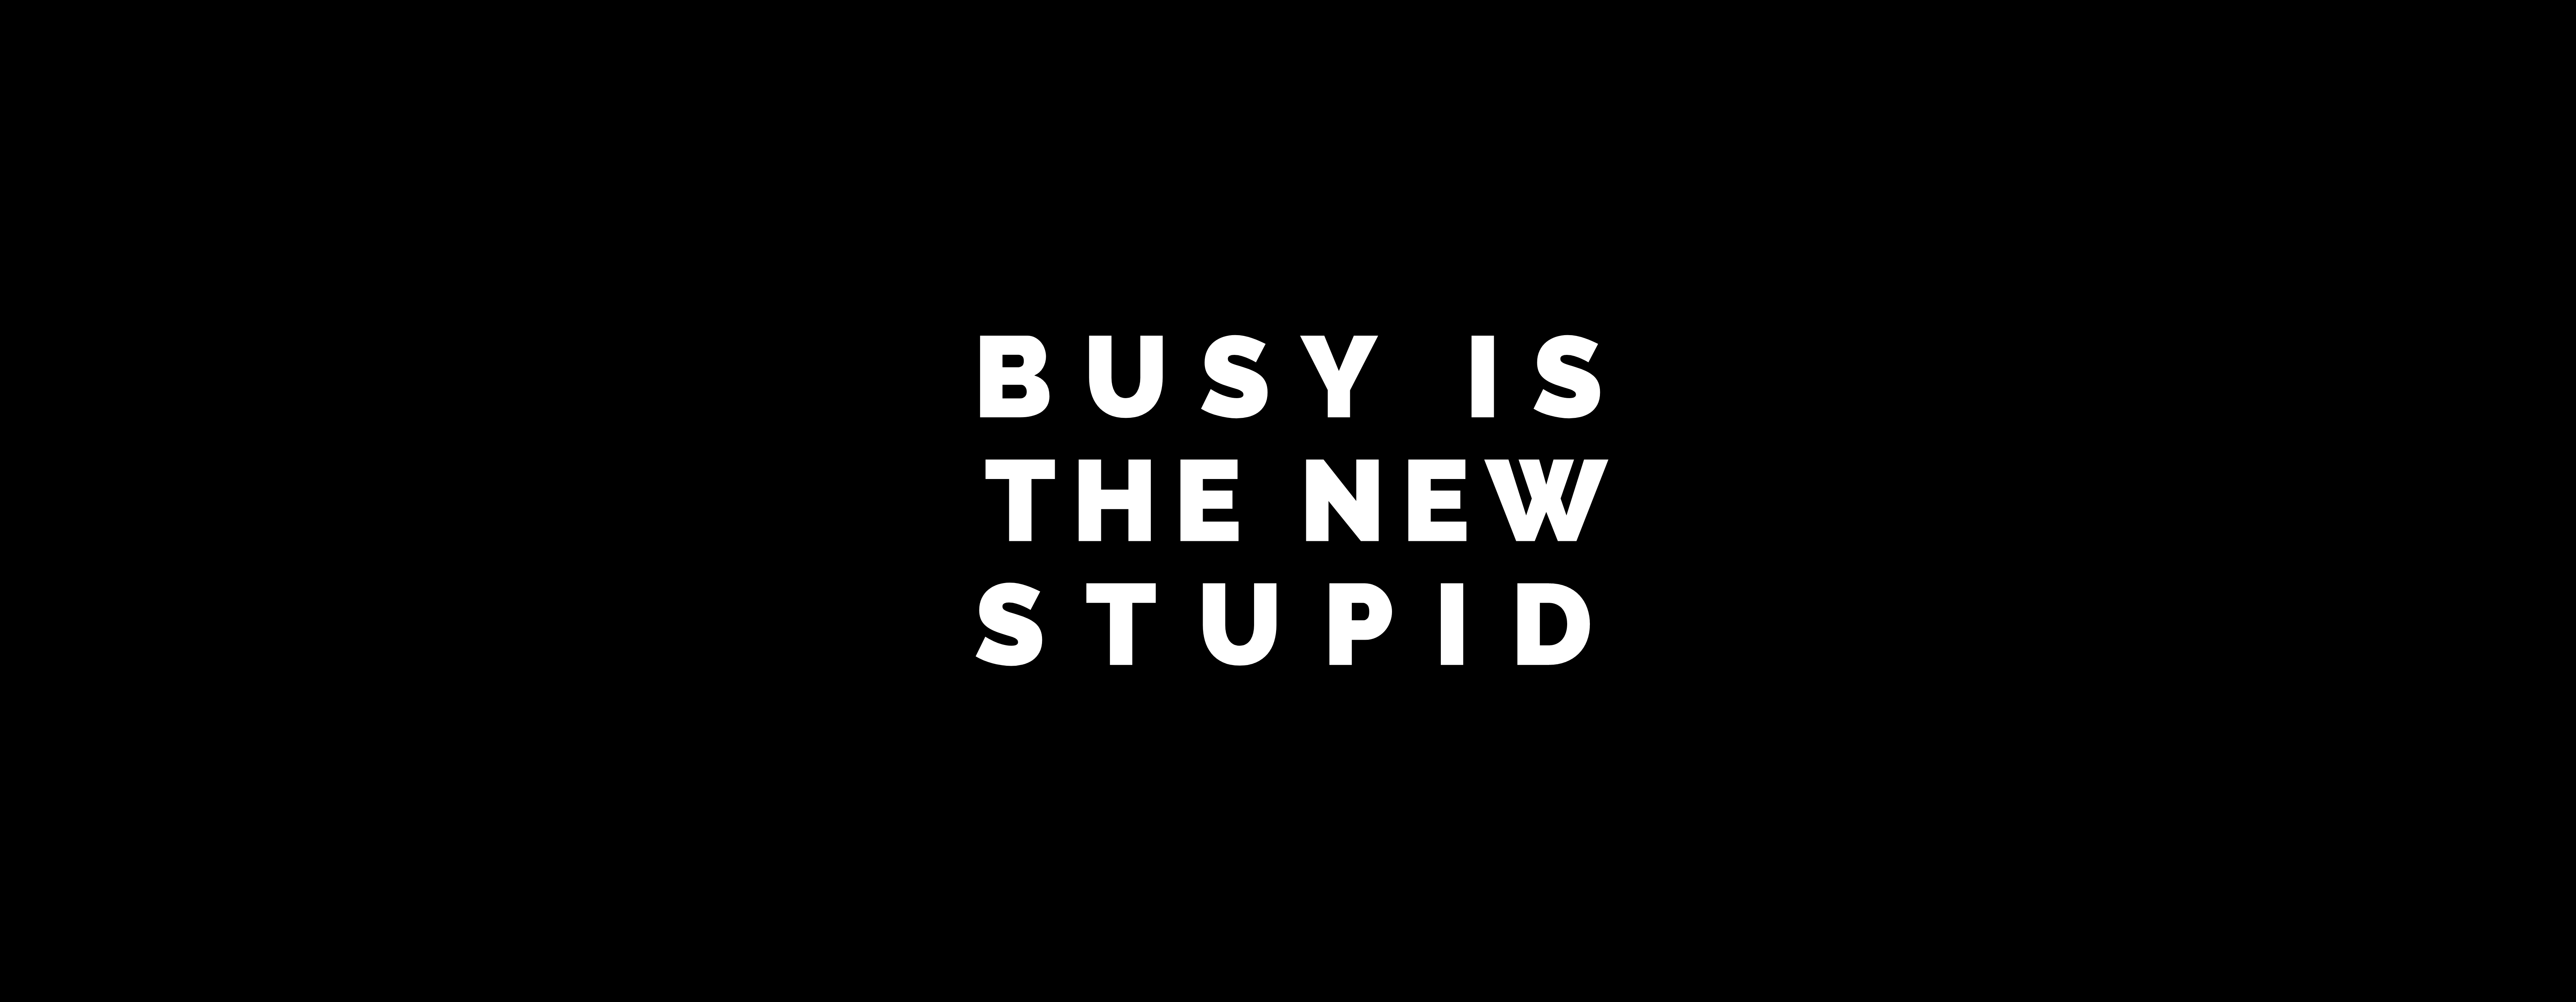 time management for leaders cover: busy is the new stupid